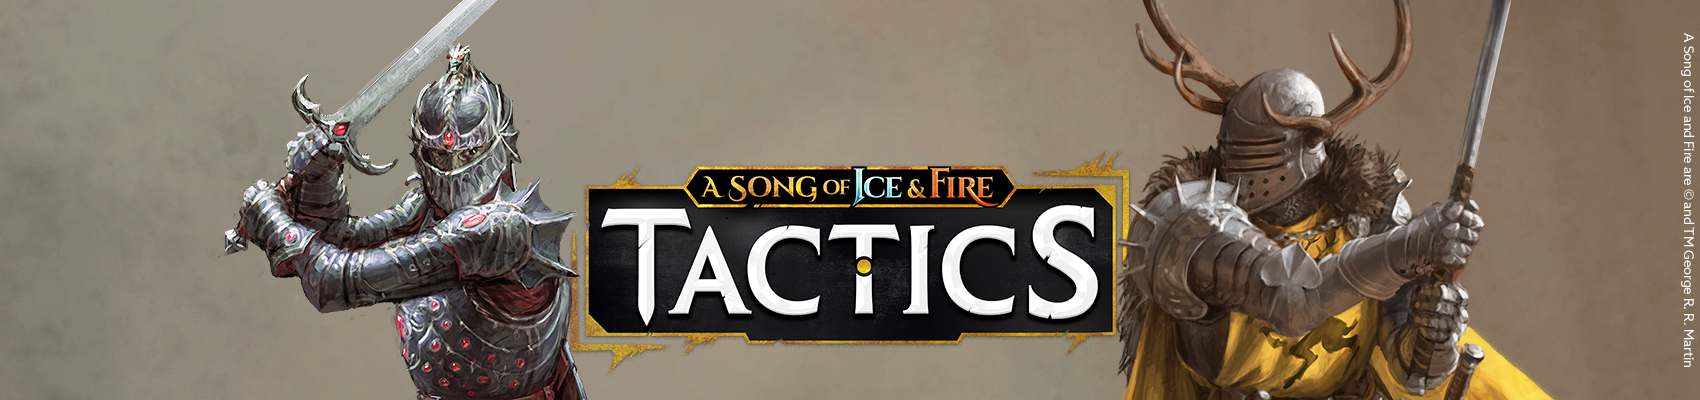 A Song Of Ice & Fire Tactics - CMON